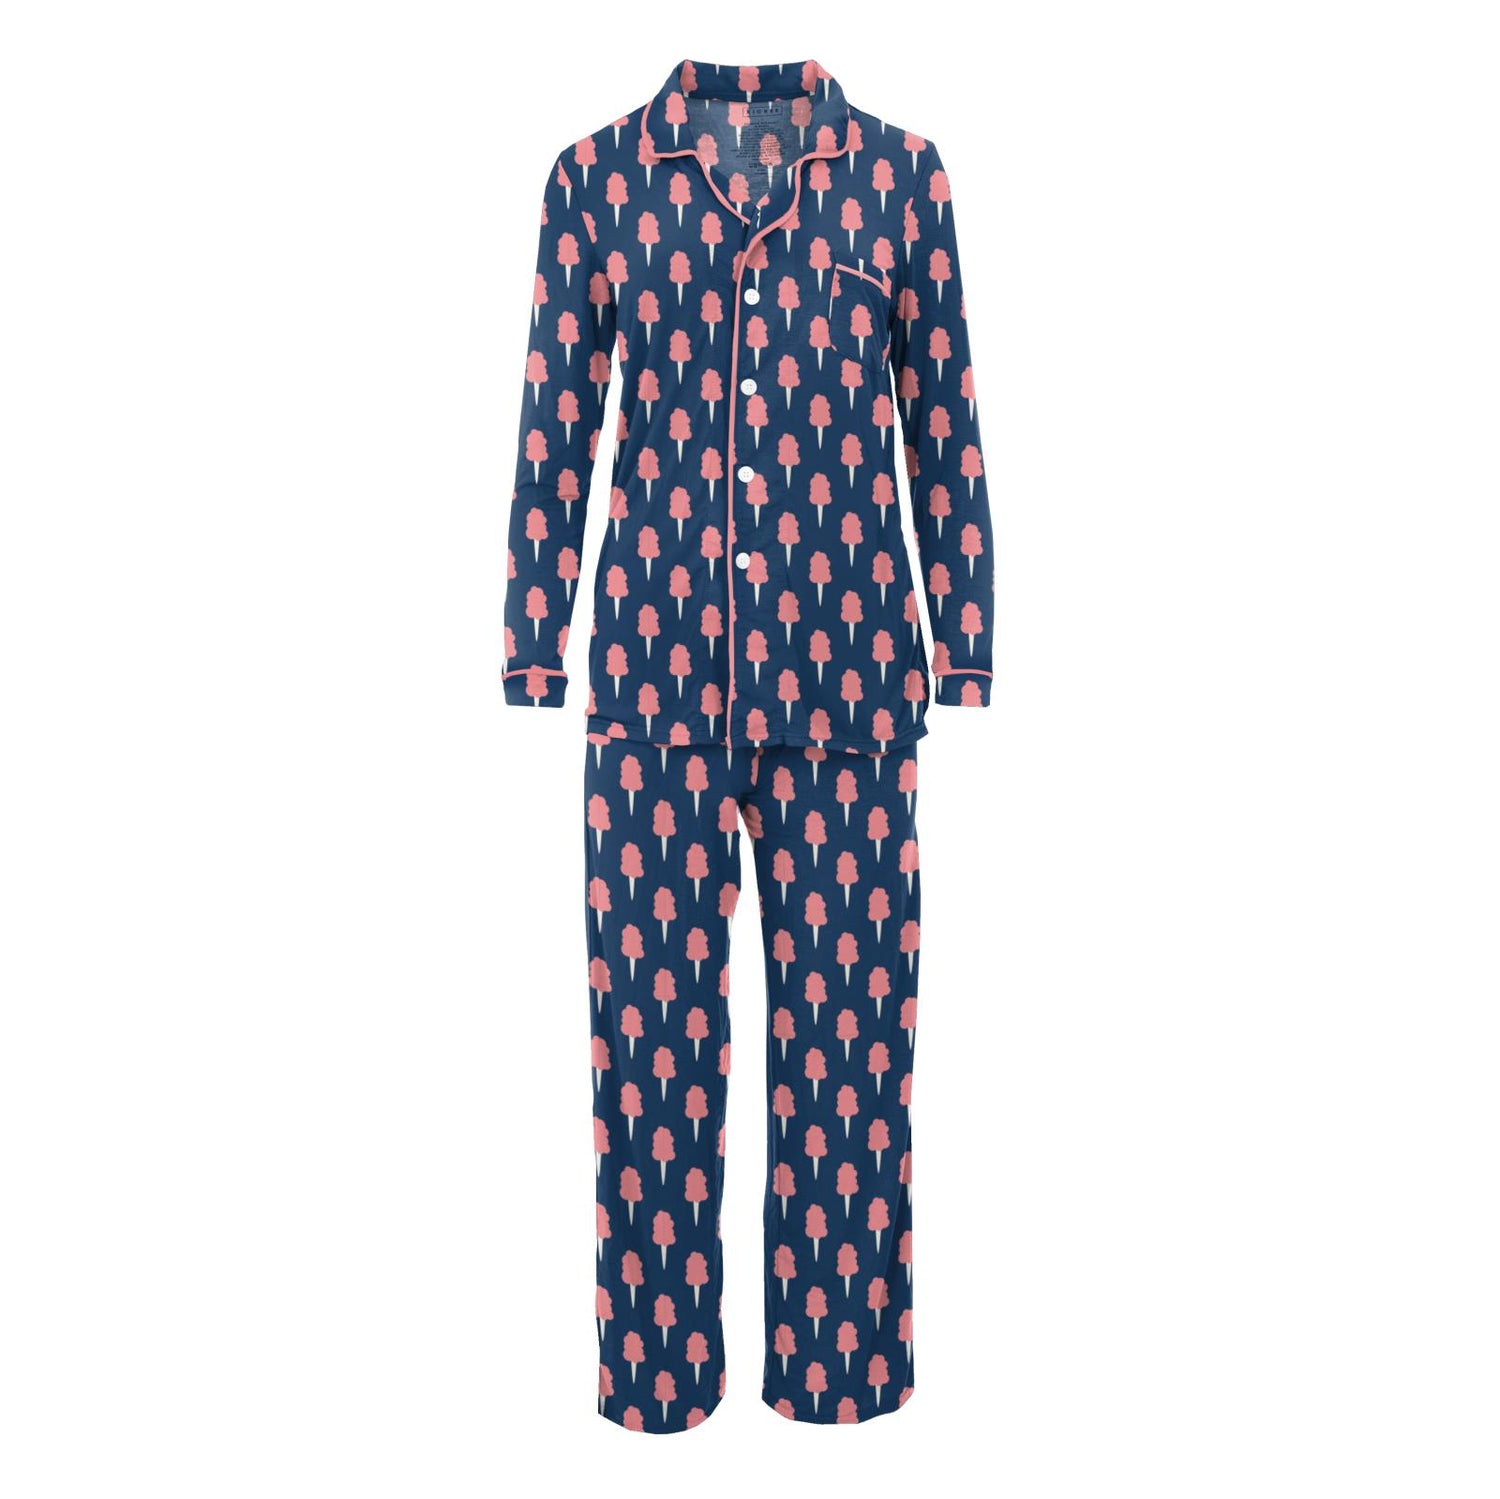 Women's Print Long Sleeve Collared Pajama Set in Navy Cotton Candy